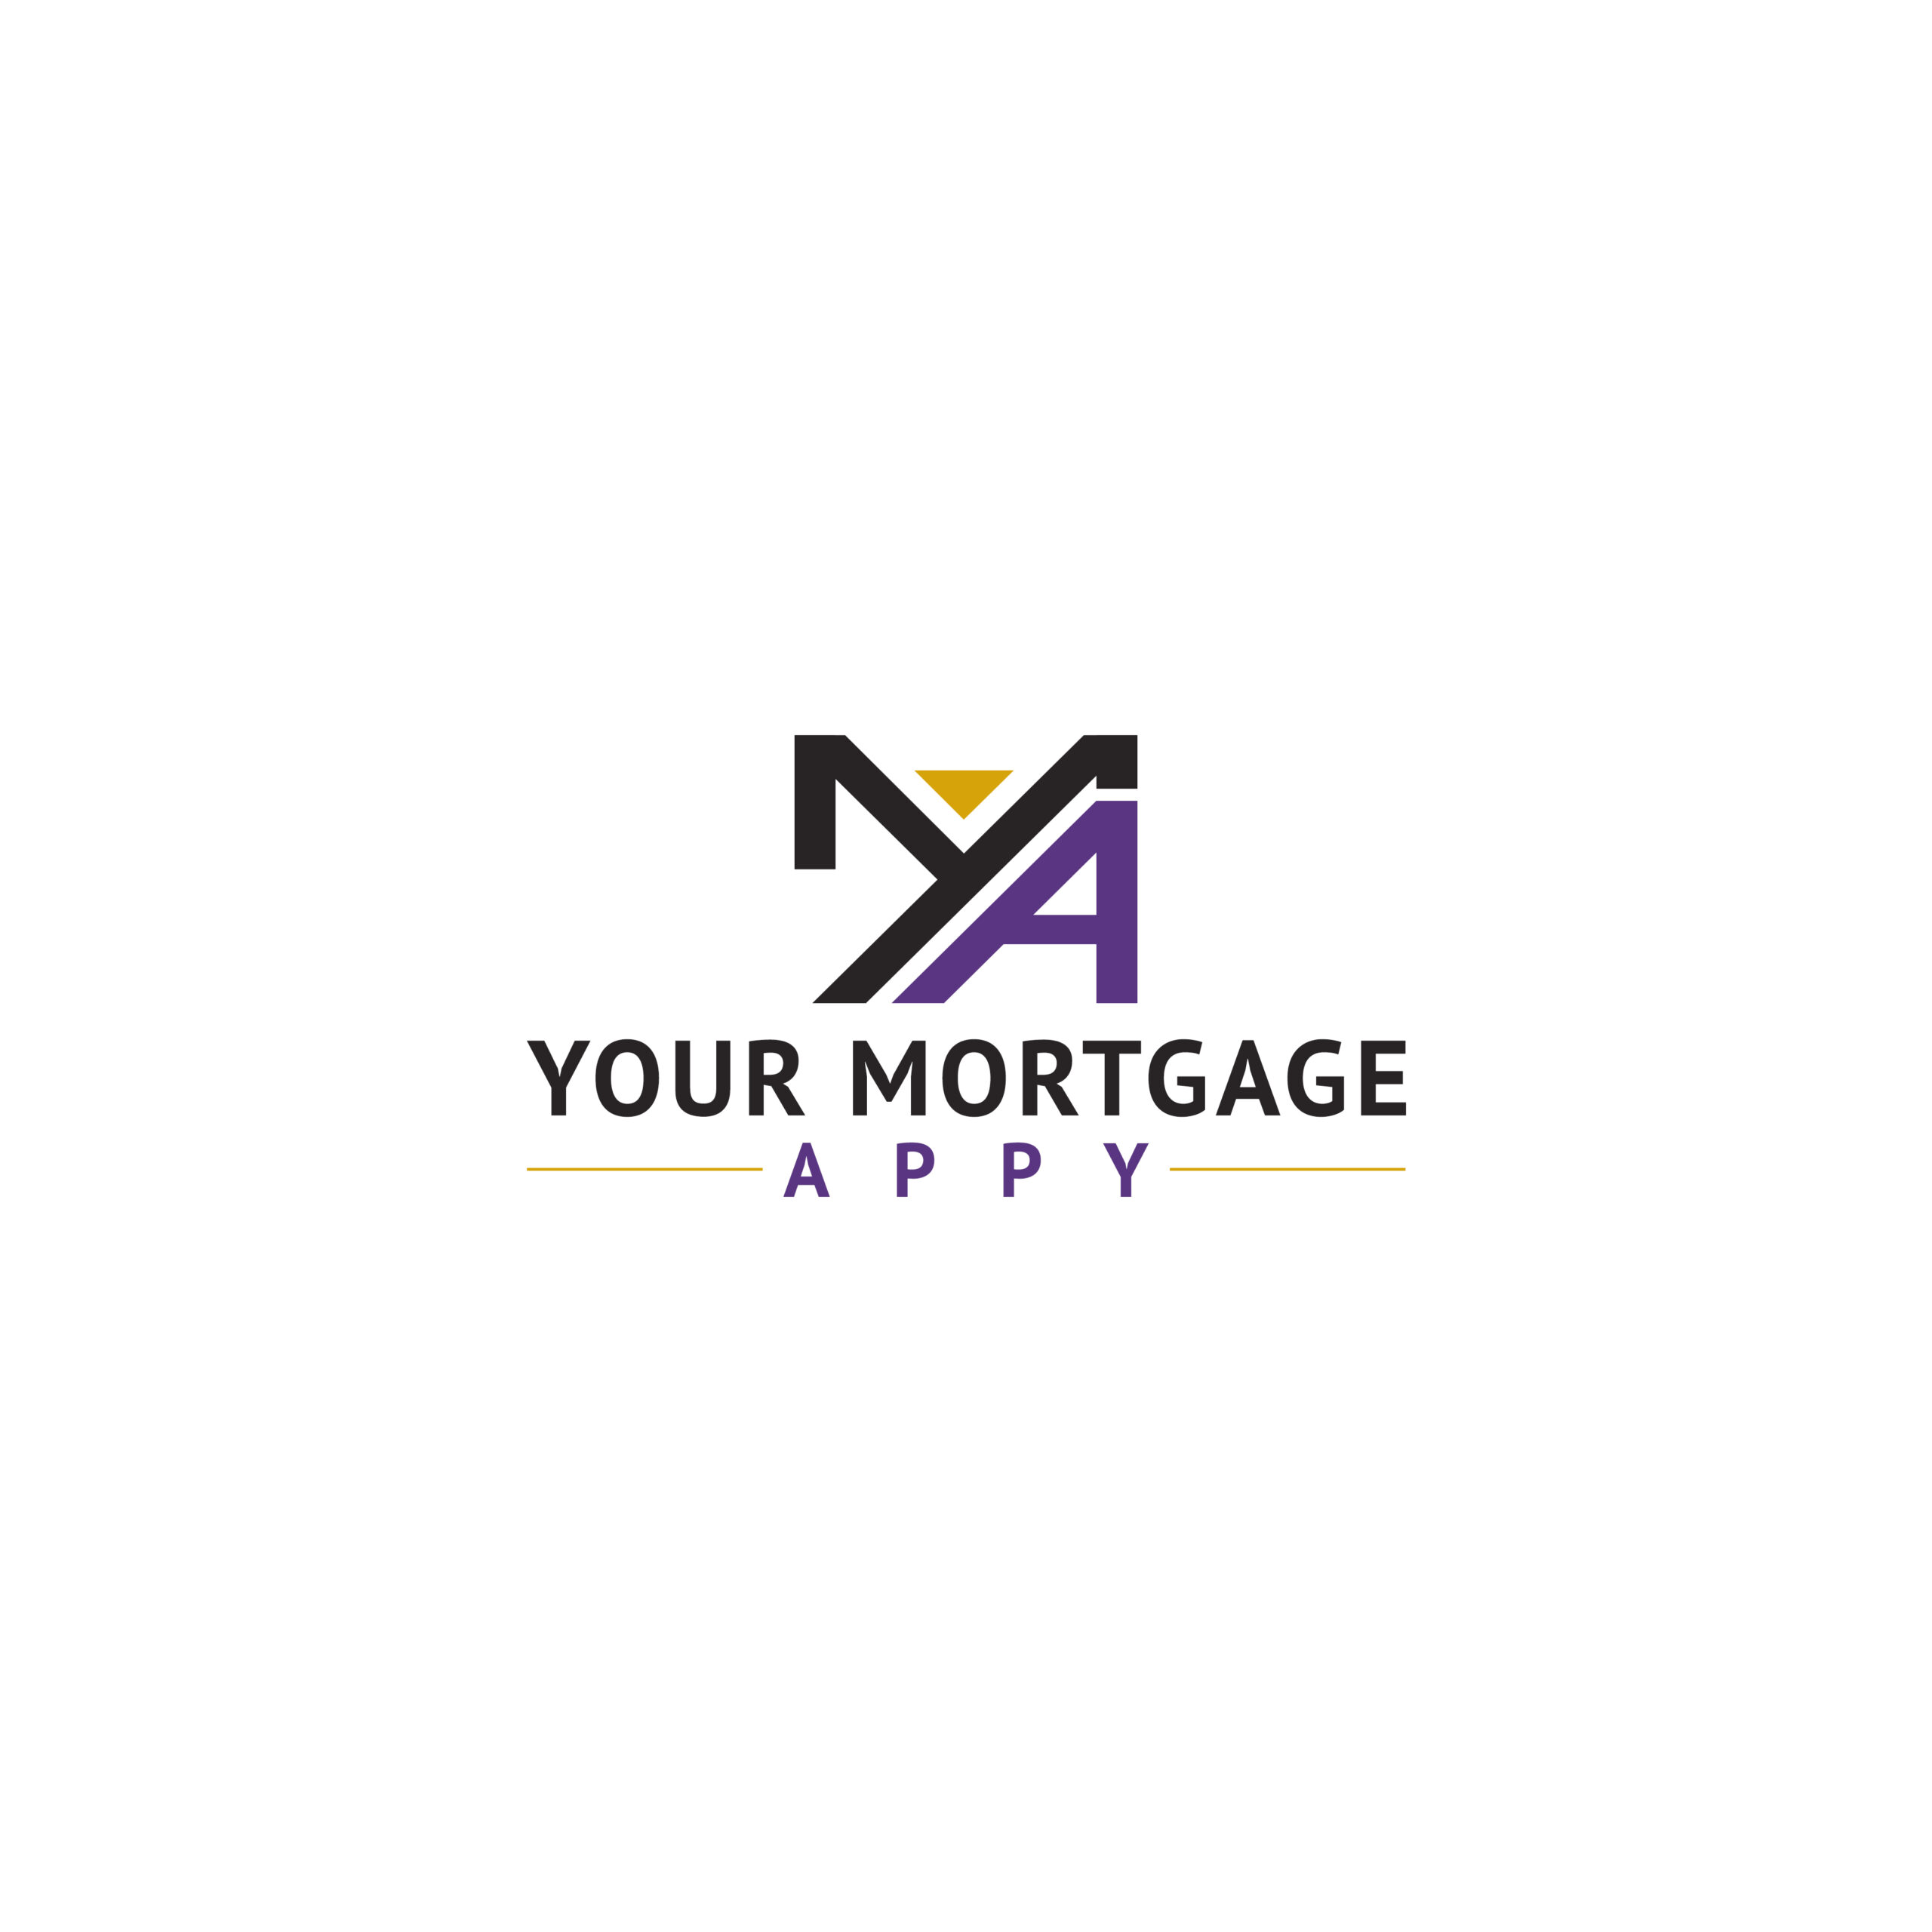 Your Mortgage Appy